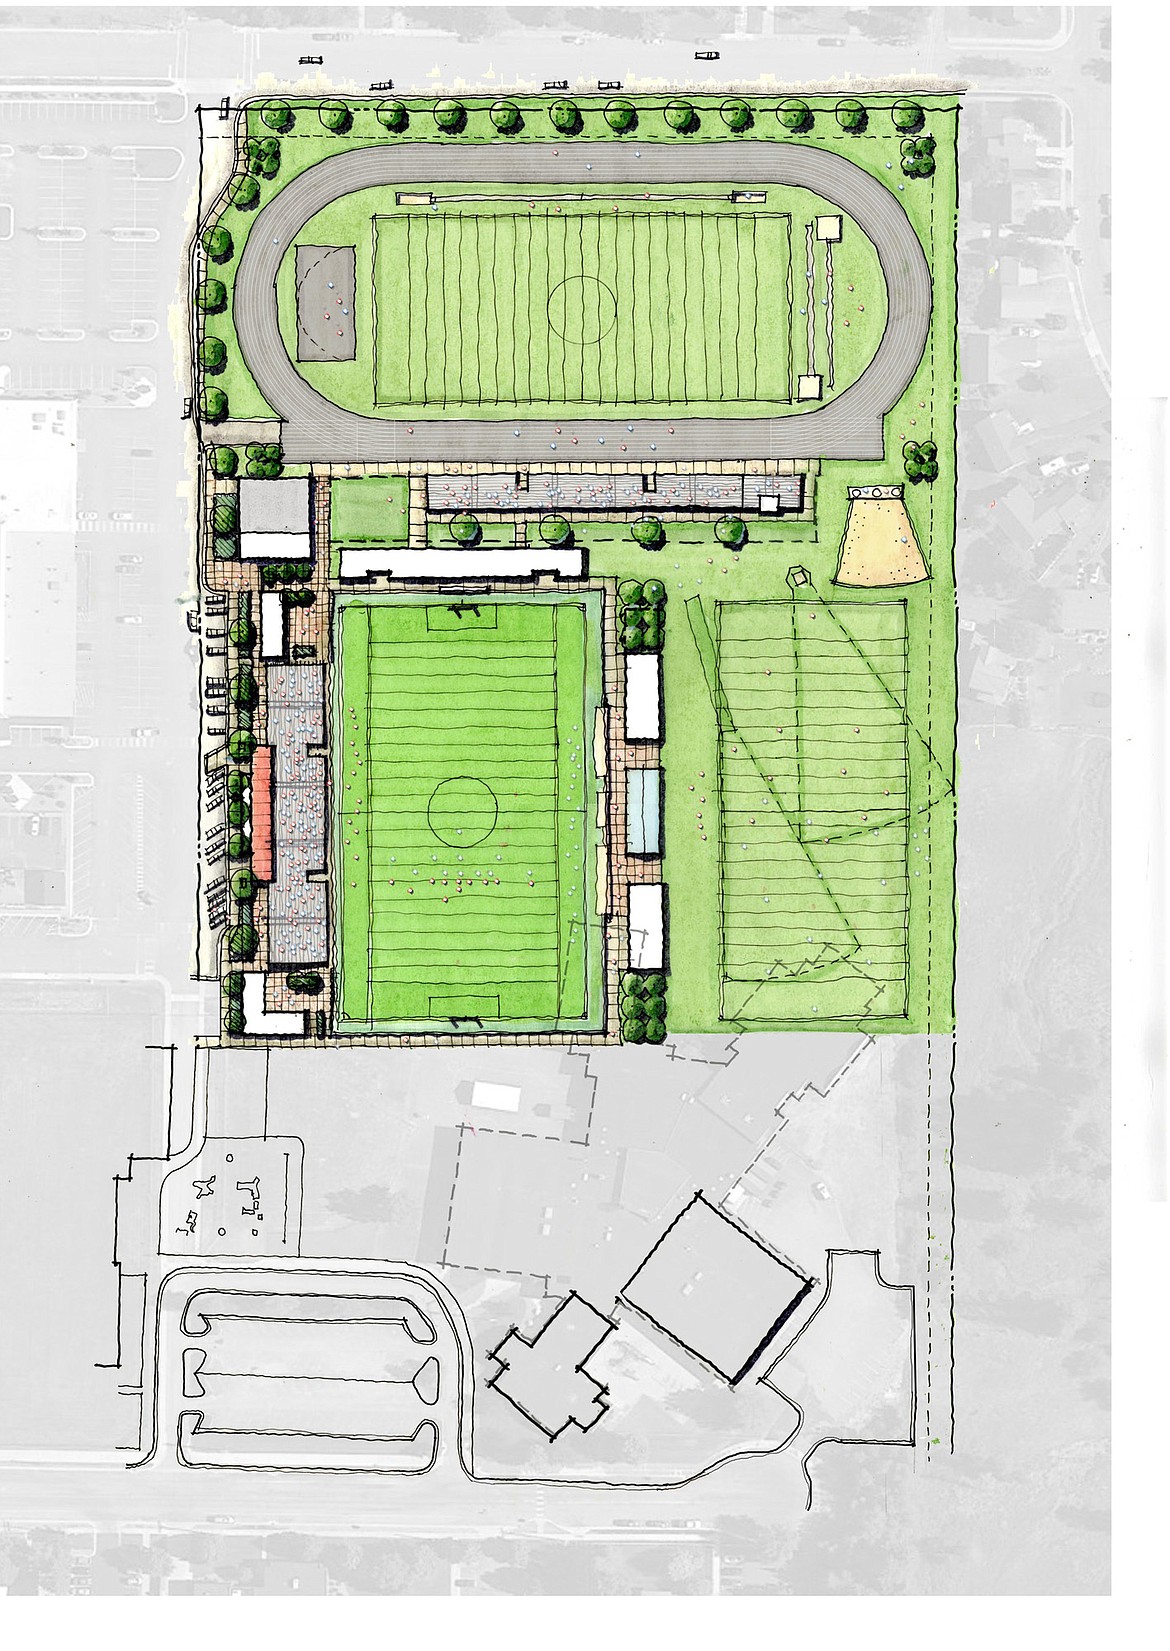 A mockup shows how a Bulldogs stadium facility could be laid out on the land adjacent to the high school. (Courtesy CTA Architects)